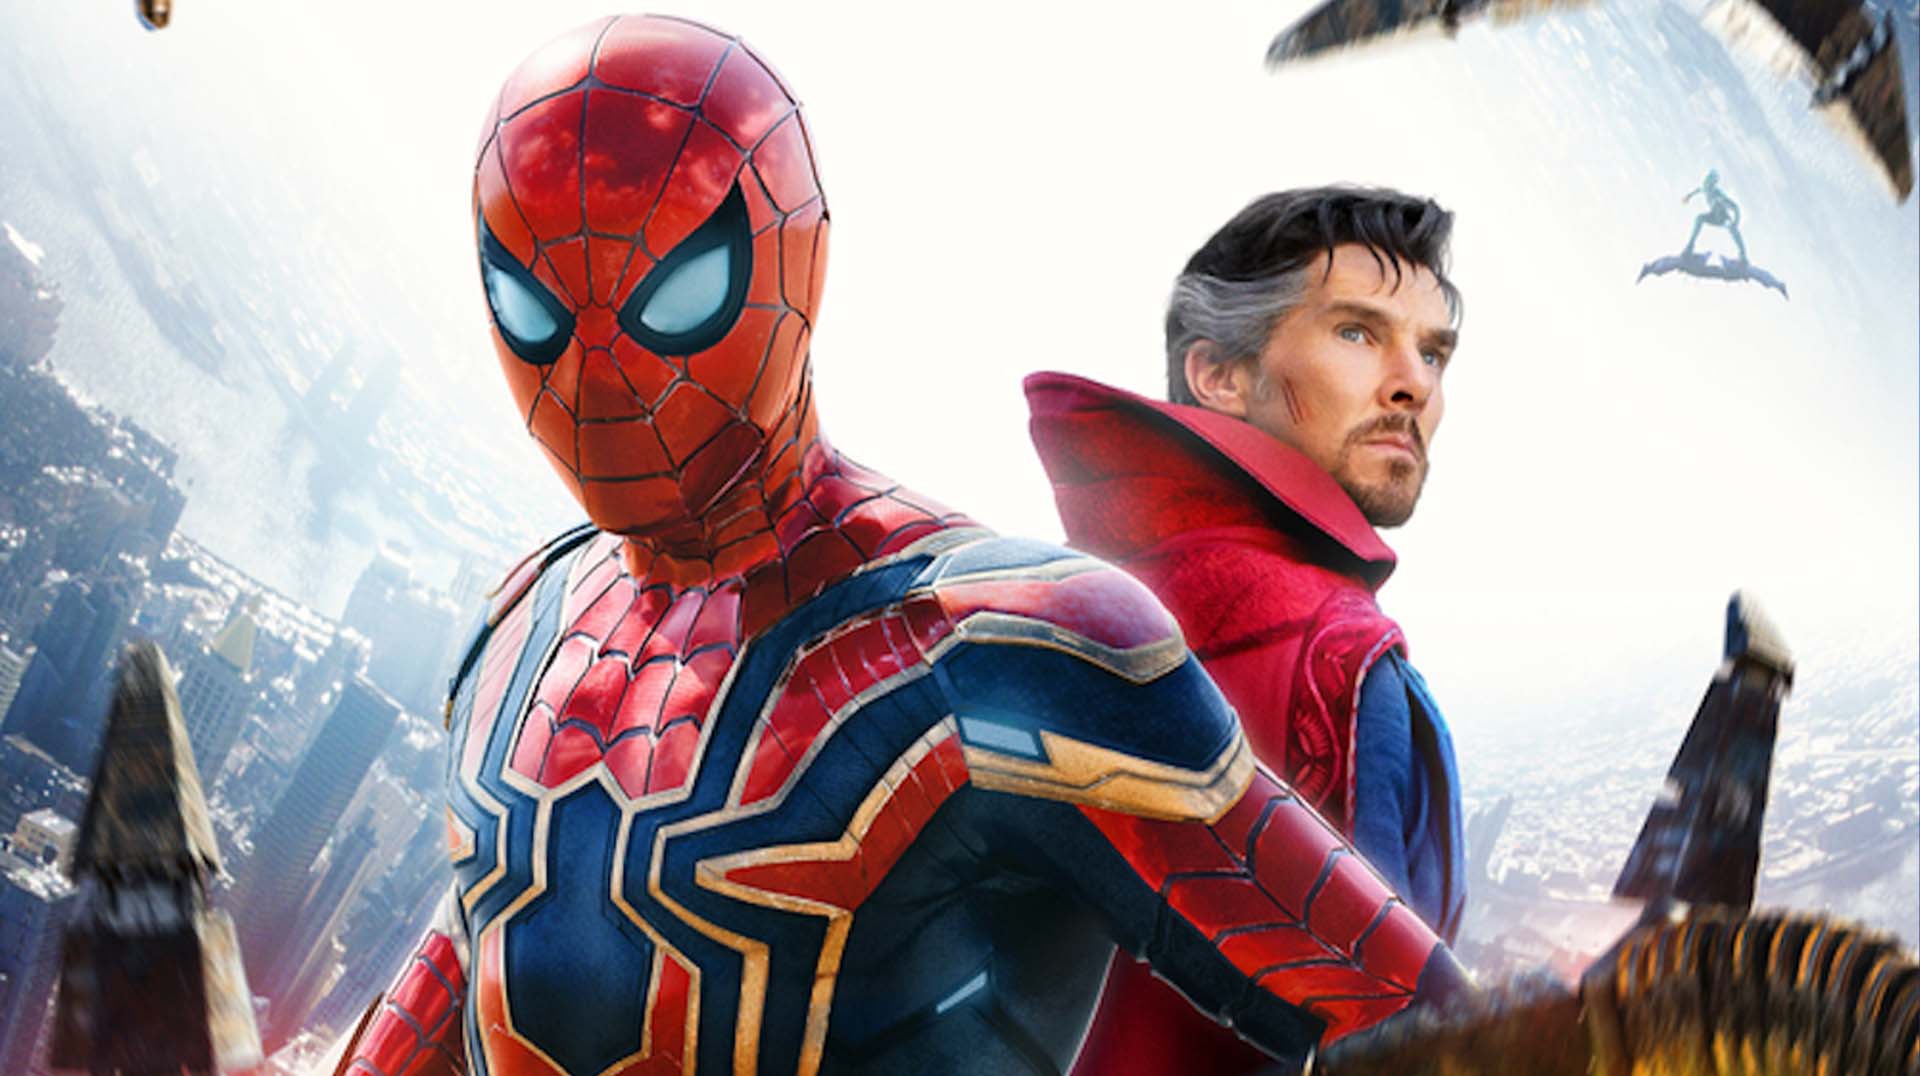 Spider-Man: No Way Home—recap, theories and a look at what's ahead